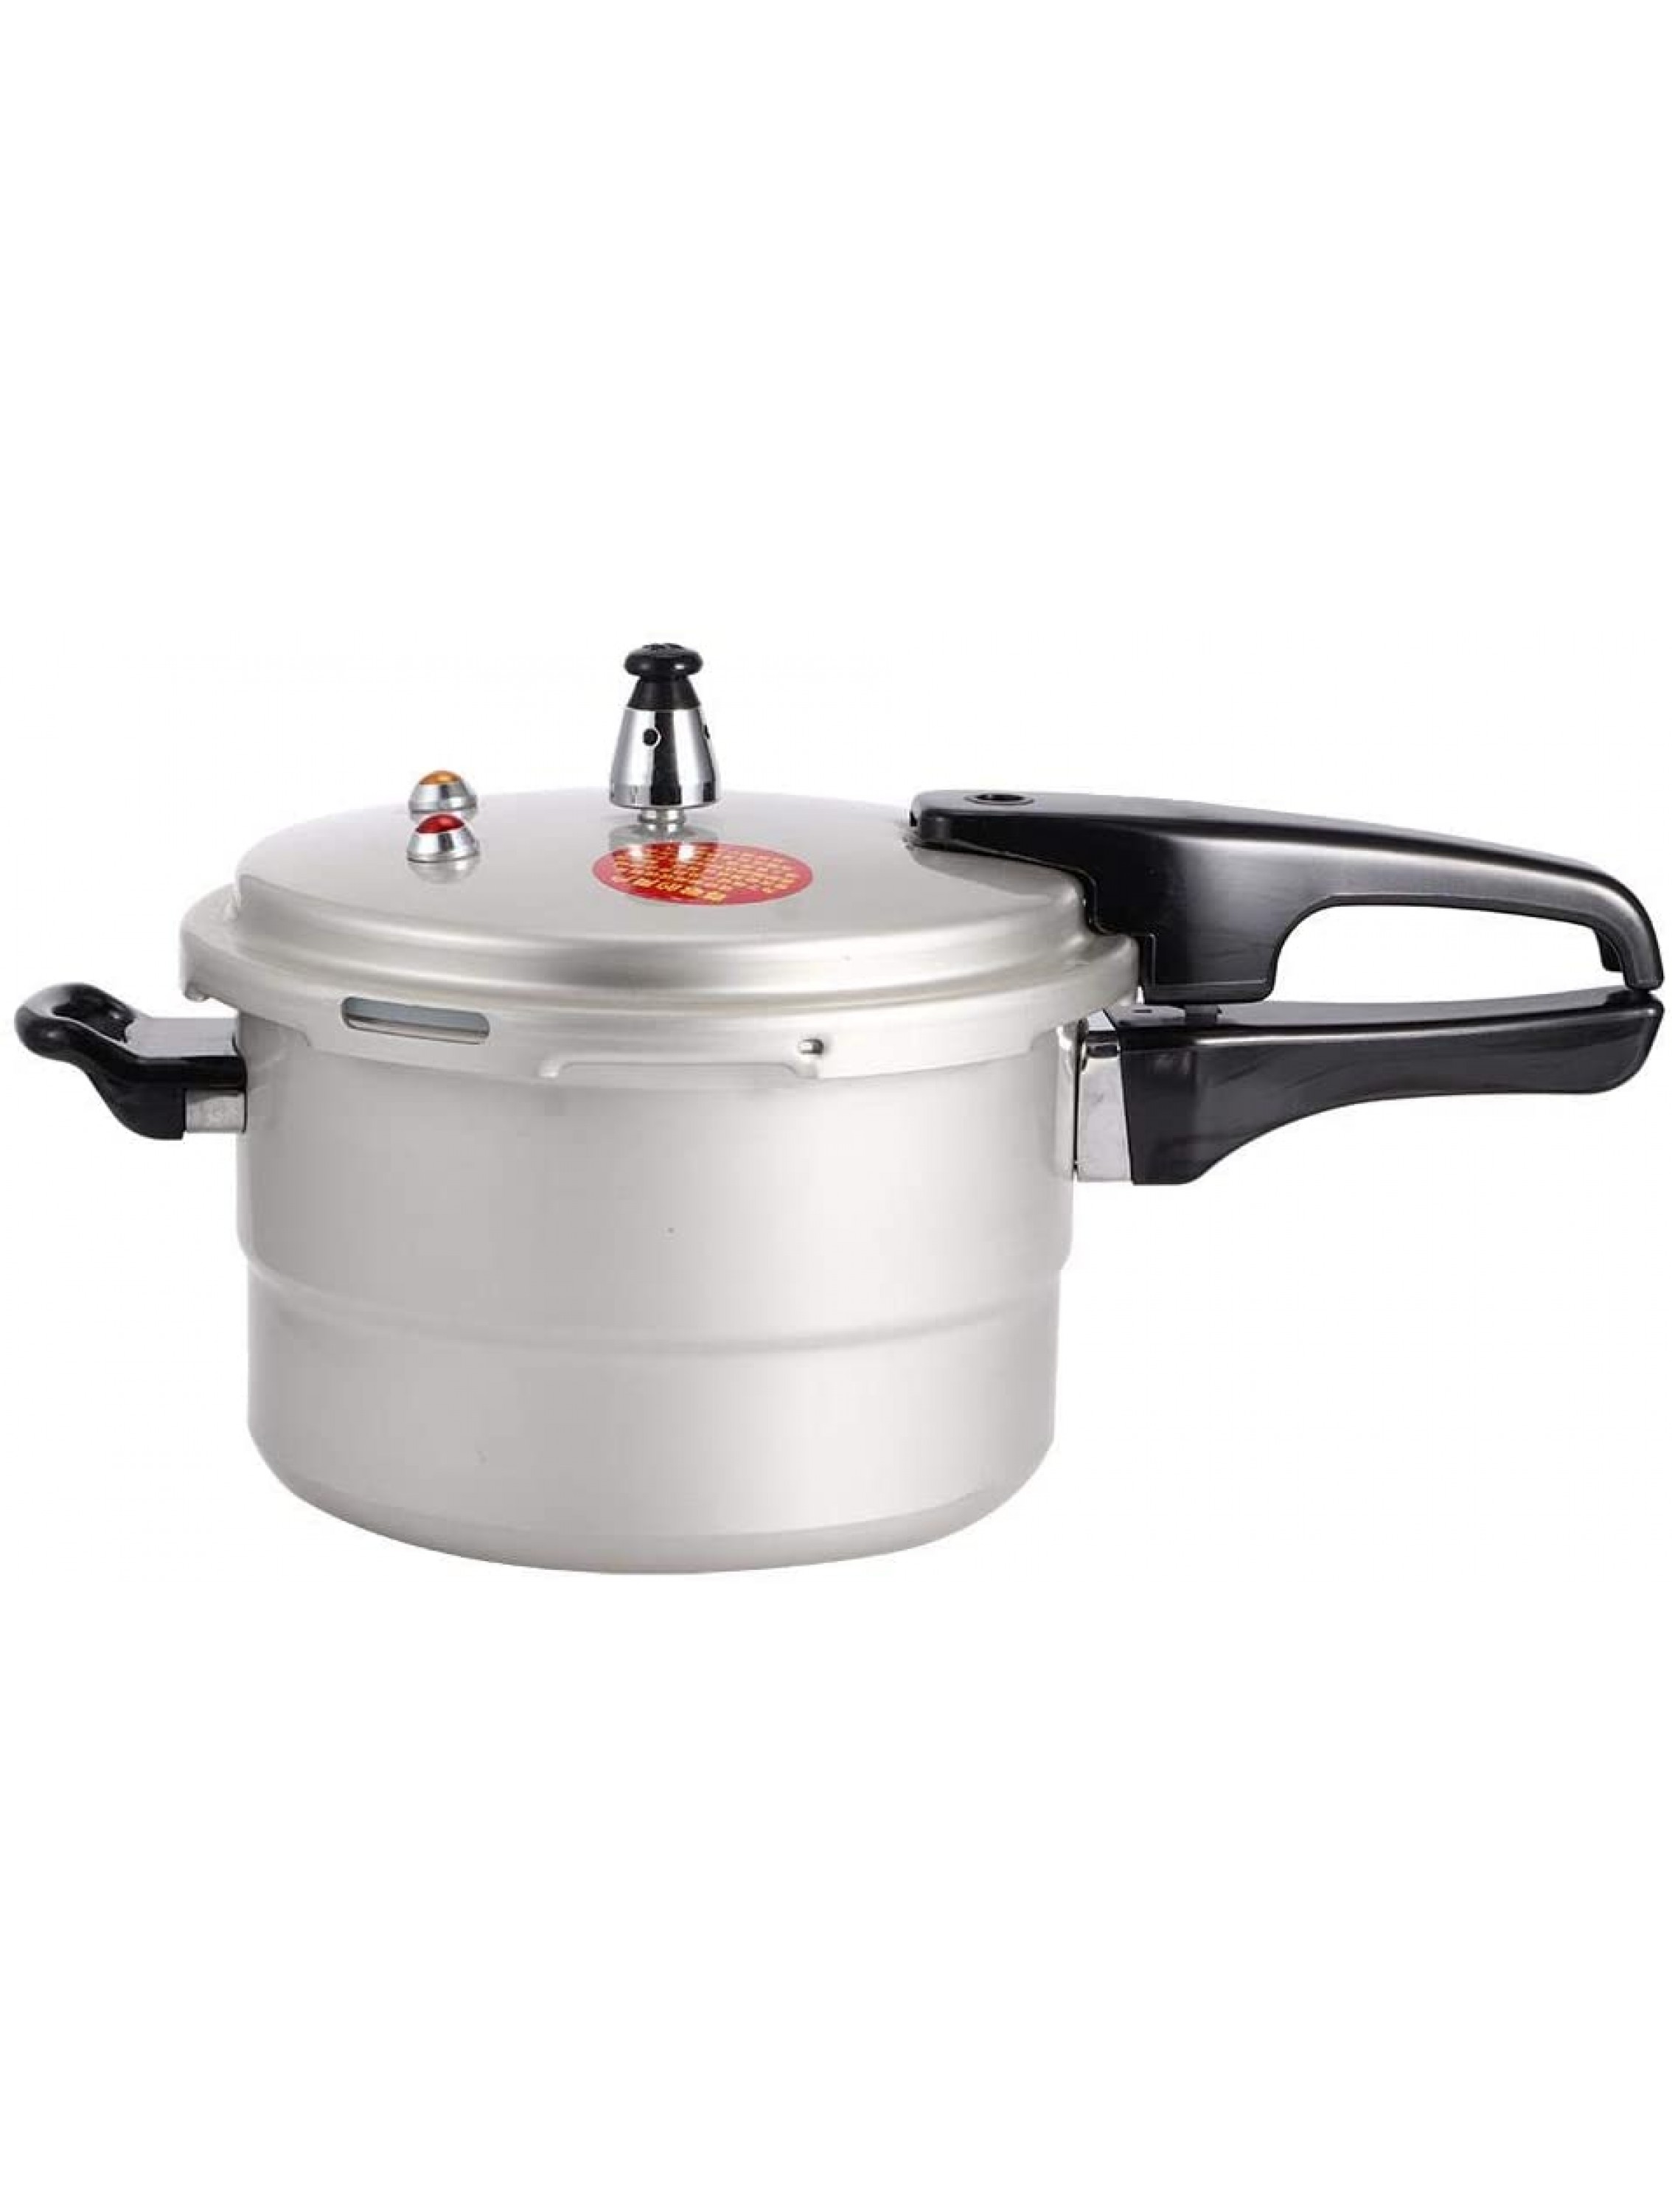 Pressure Cooking Pot Heat-resistant Pressure-cooker Kitchen Electric Ceramic Stove for Gas Stove Home20cm gas gas - BGV1CU5BR